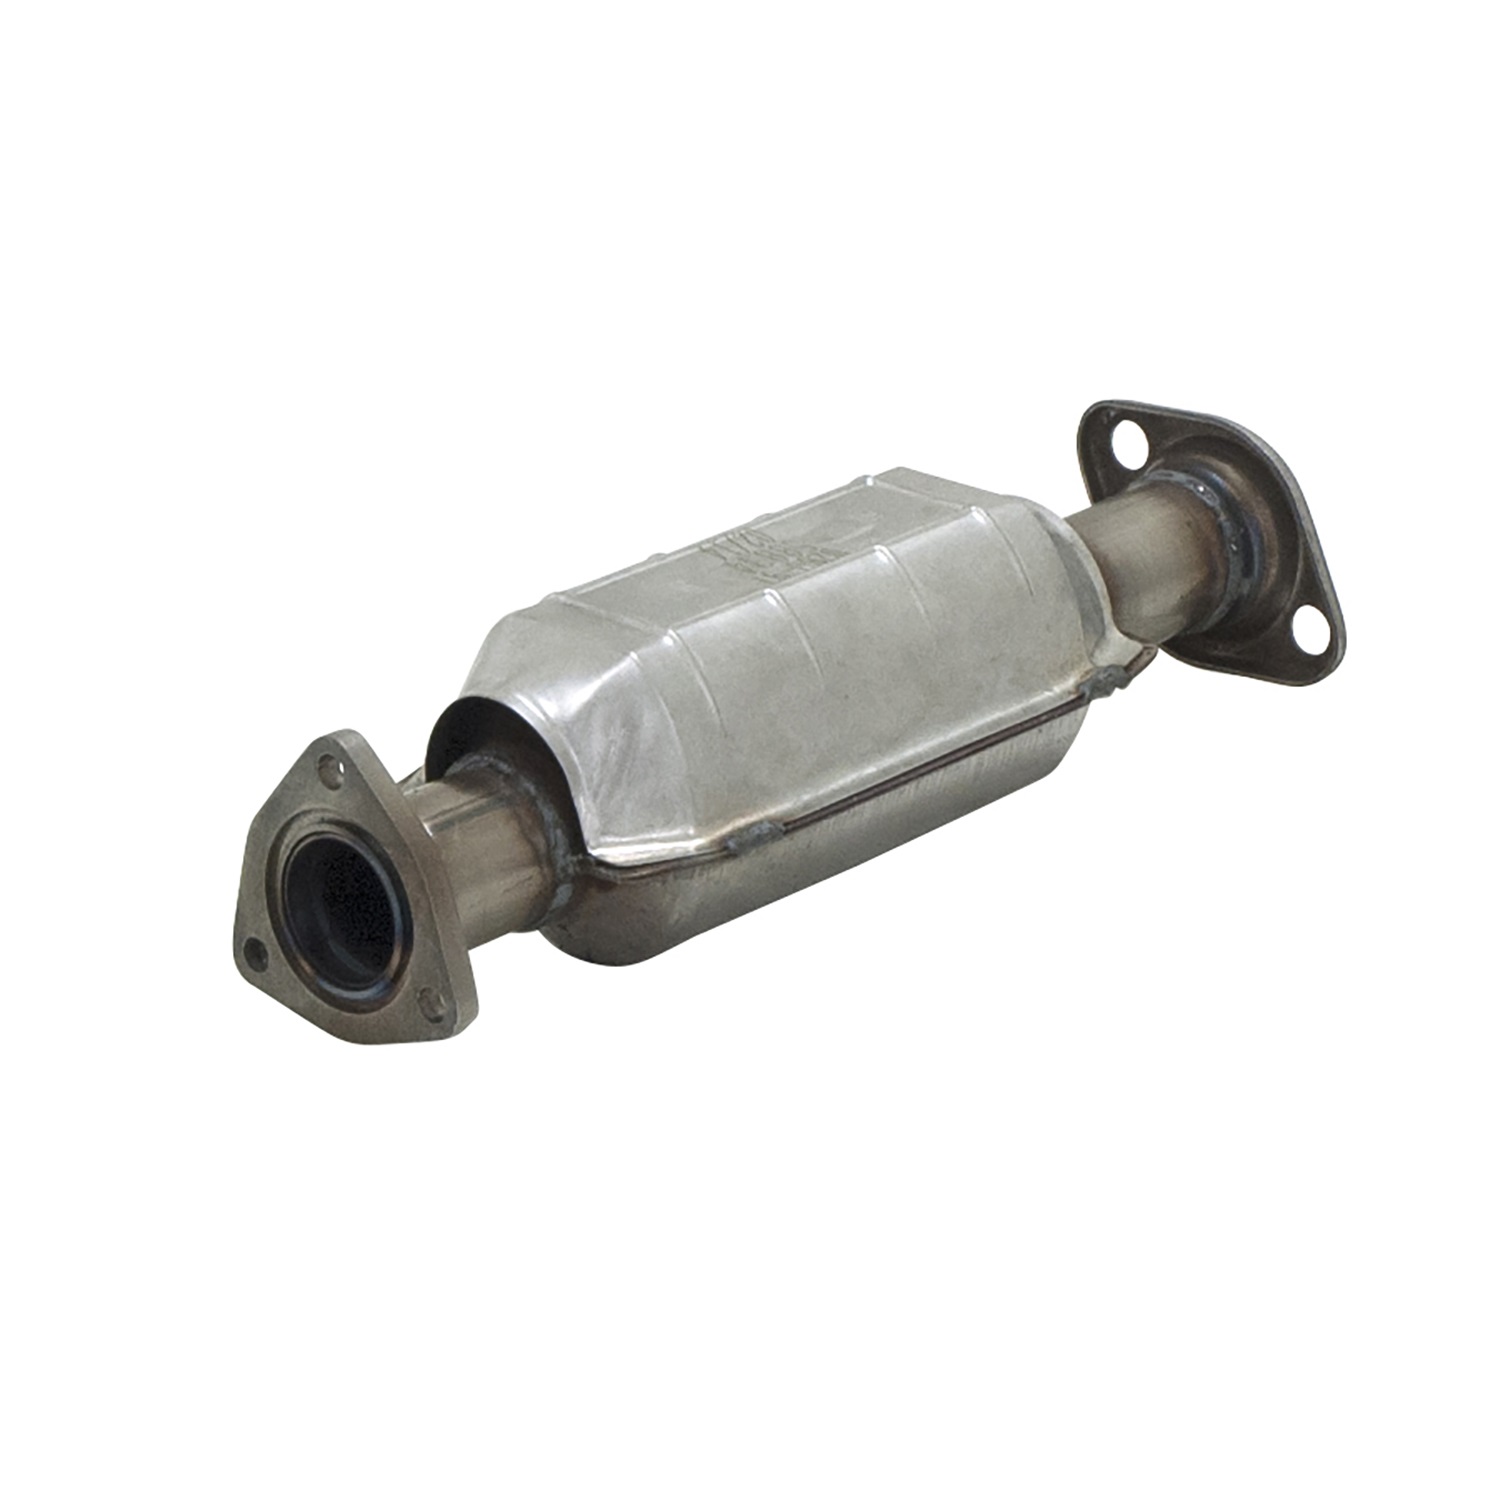 Flowmaster Flowmaster 3060009 Direct Fit Catalytic Converter Fits 93-95 Civic